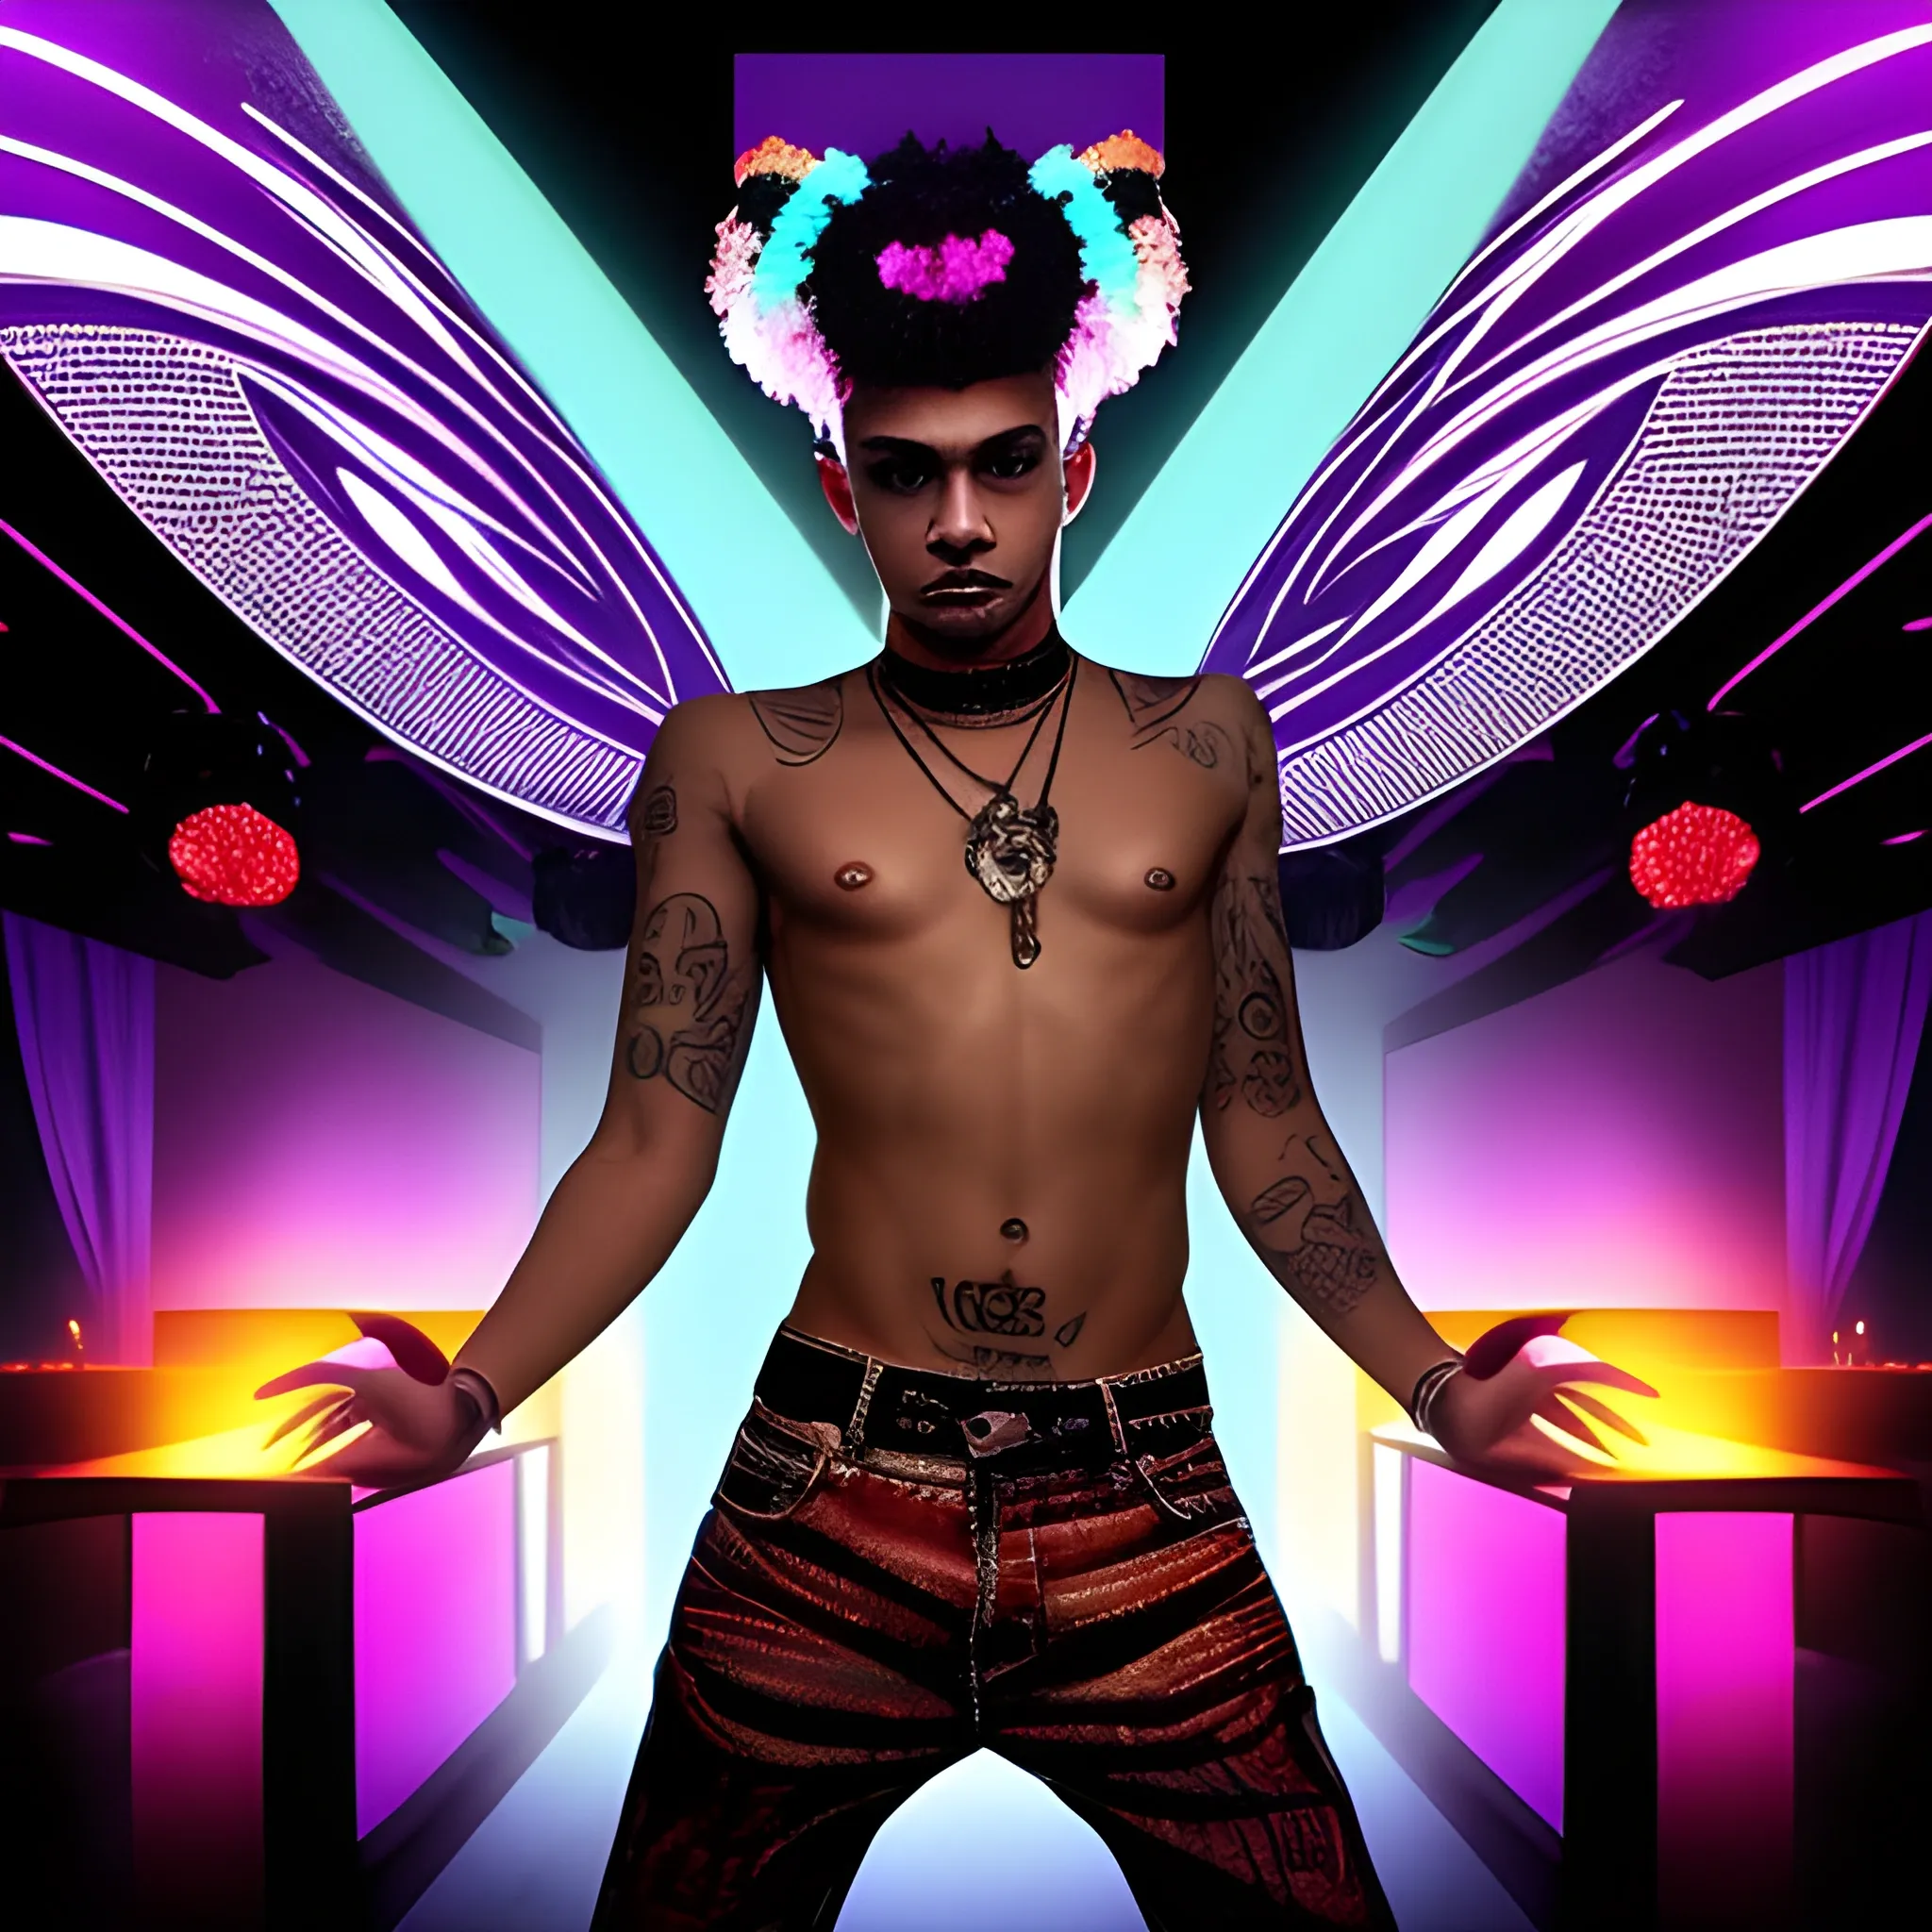 Moth, that was the name of a guy who worked in one of the most popular nightclubs in the city. He was an MC and a dancer, and his dancing style was so unique that it attracted the attention of all visitors to the club. His bright appearance hid not only talent and the ability to move to the beat of music, but also some mystical abilities.